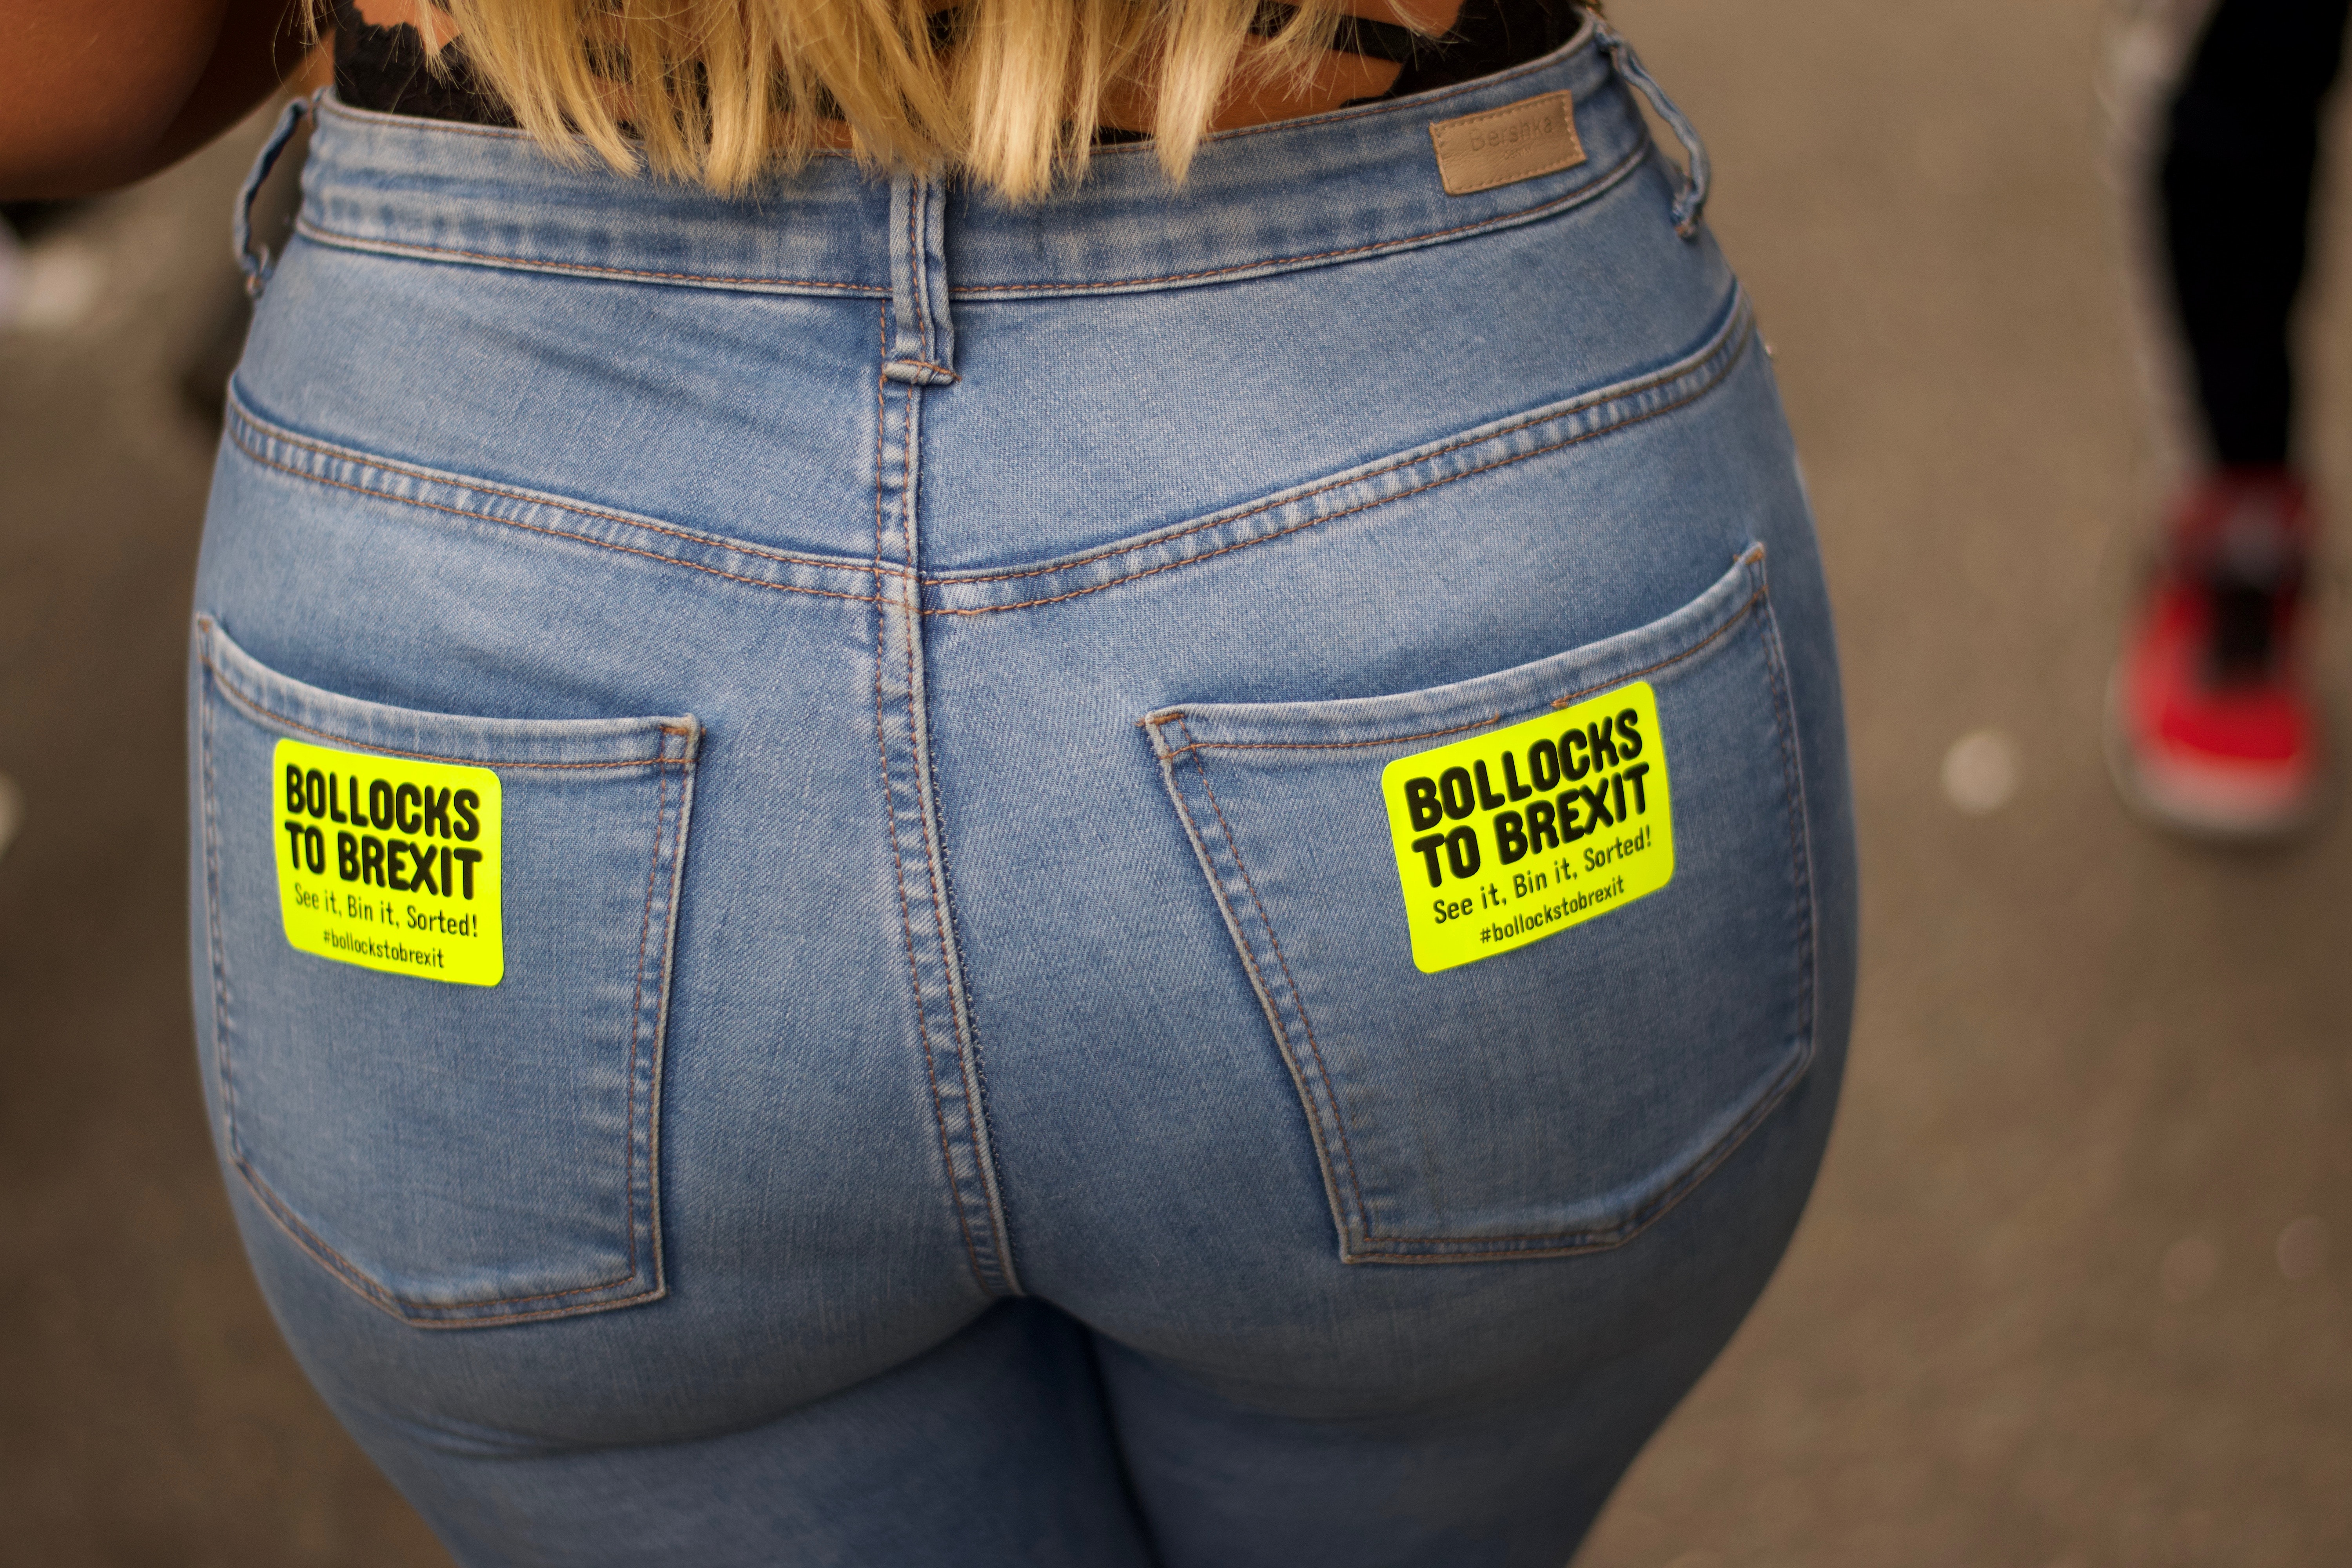 ‘Bollocks to Brexit’ stickers at Notting Hill Carnival, London. Photo by Dele Oluwayomi on Unsplash